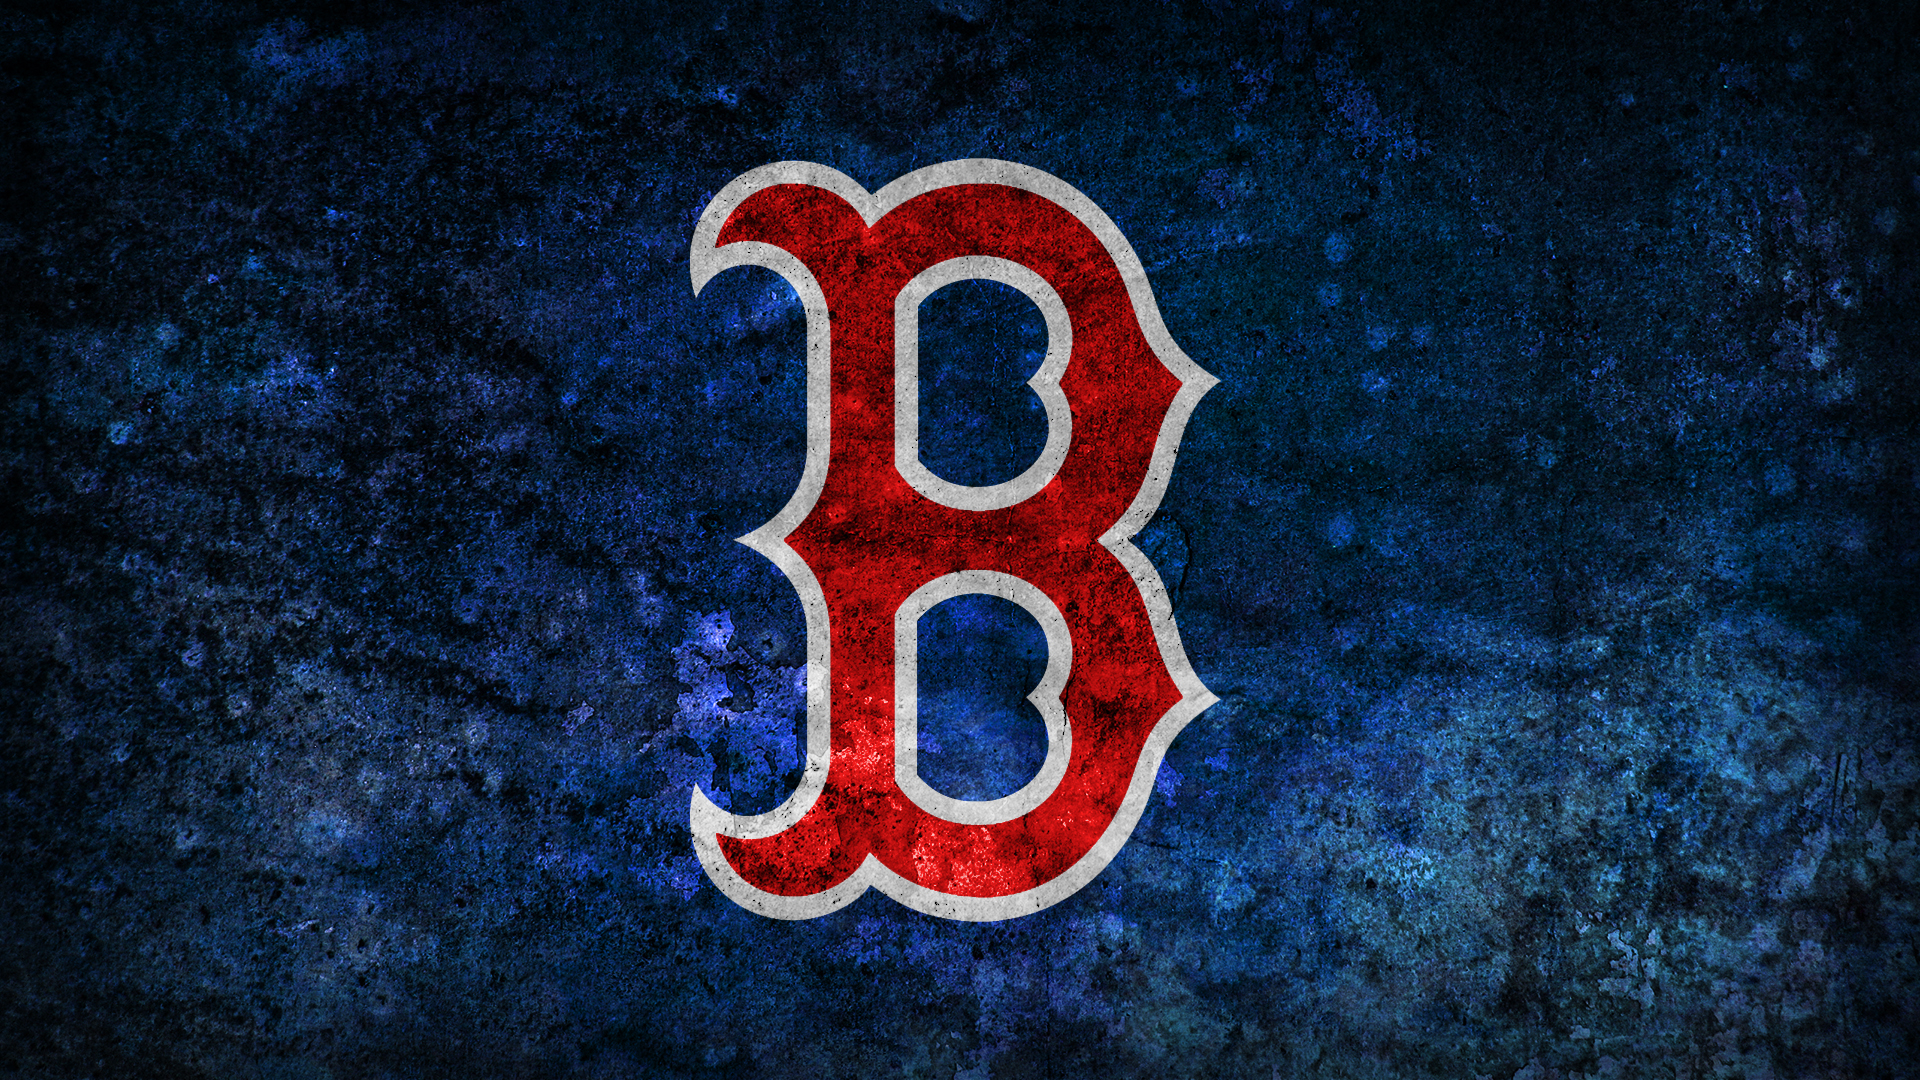 Boston Red Sox Background